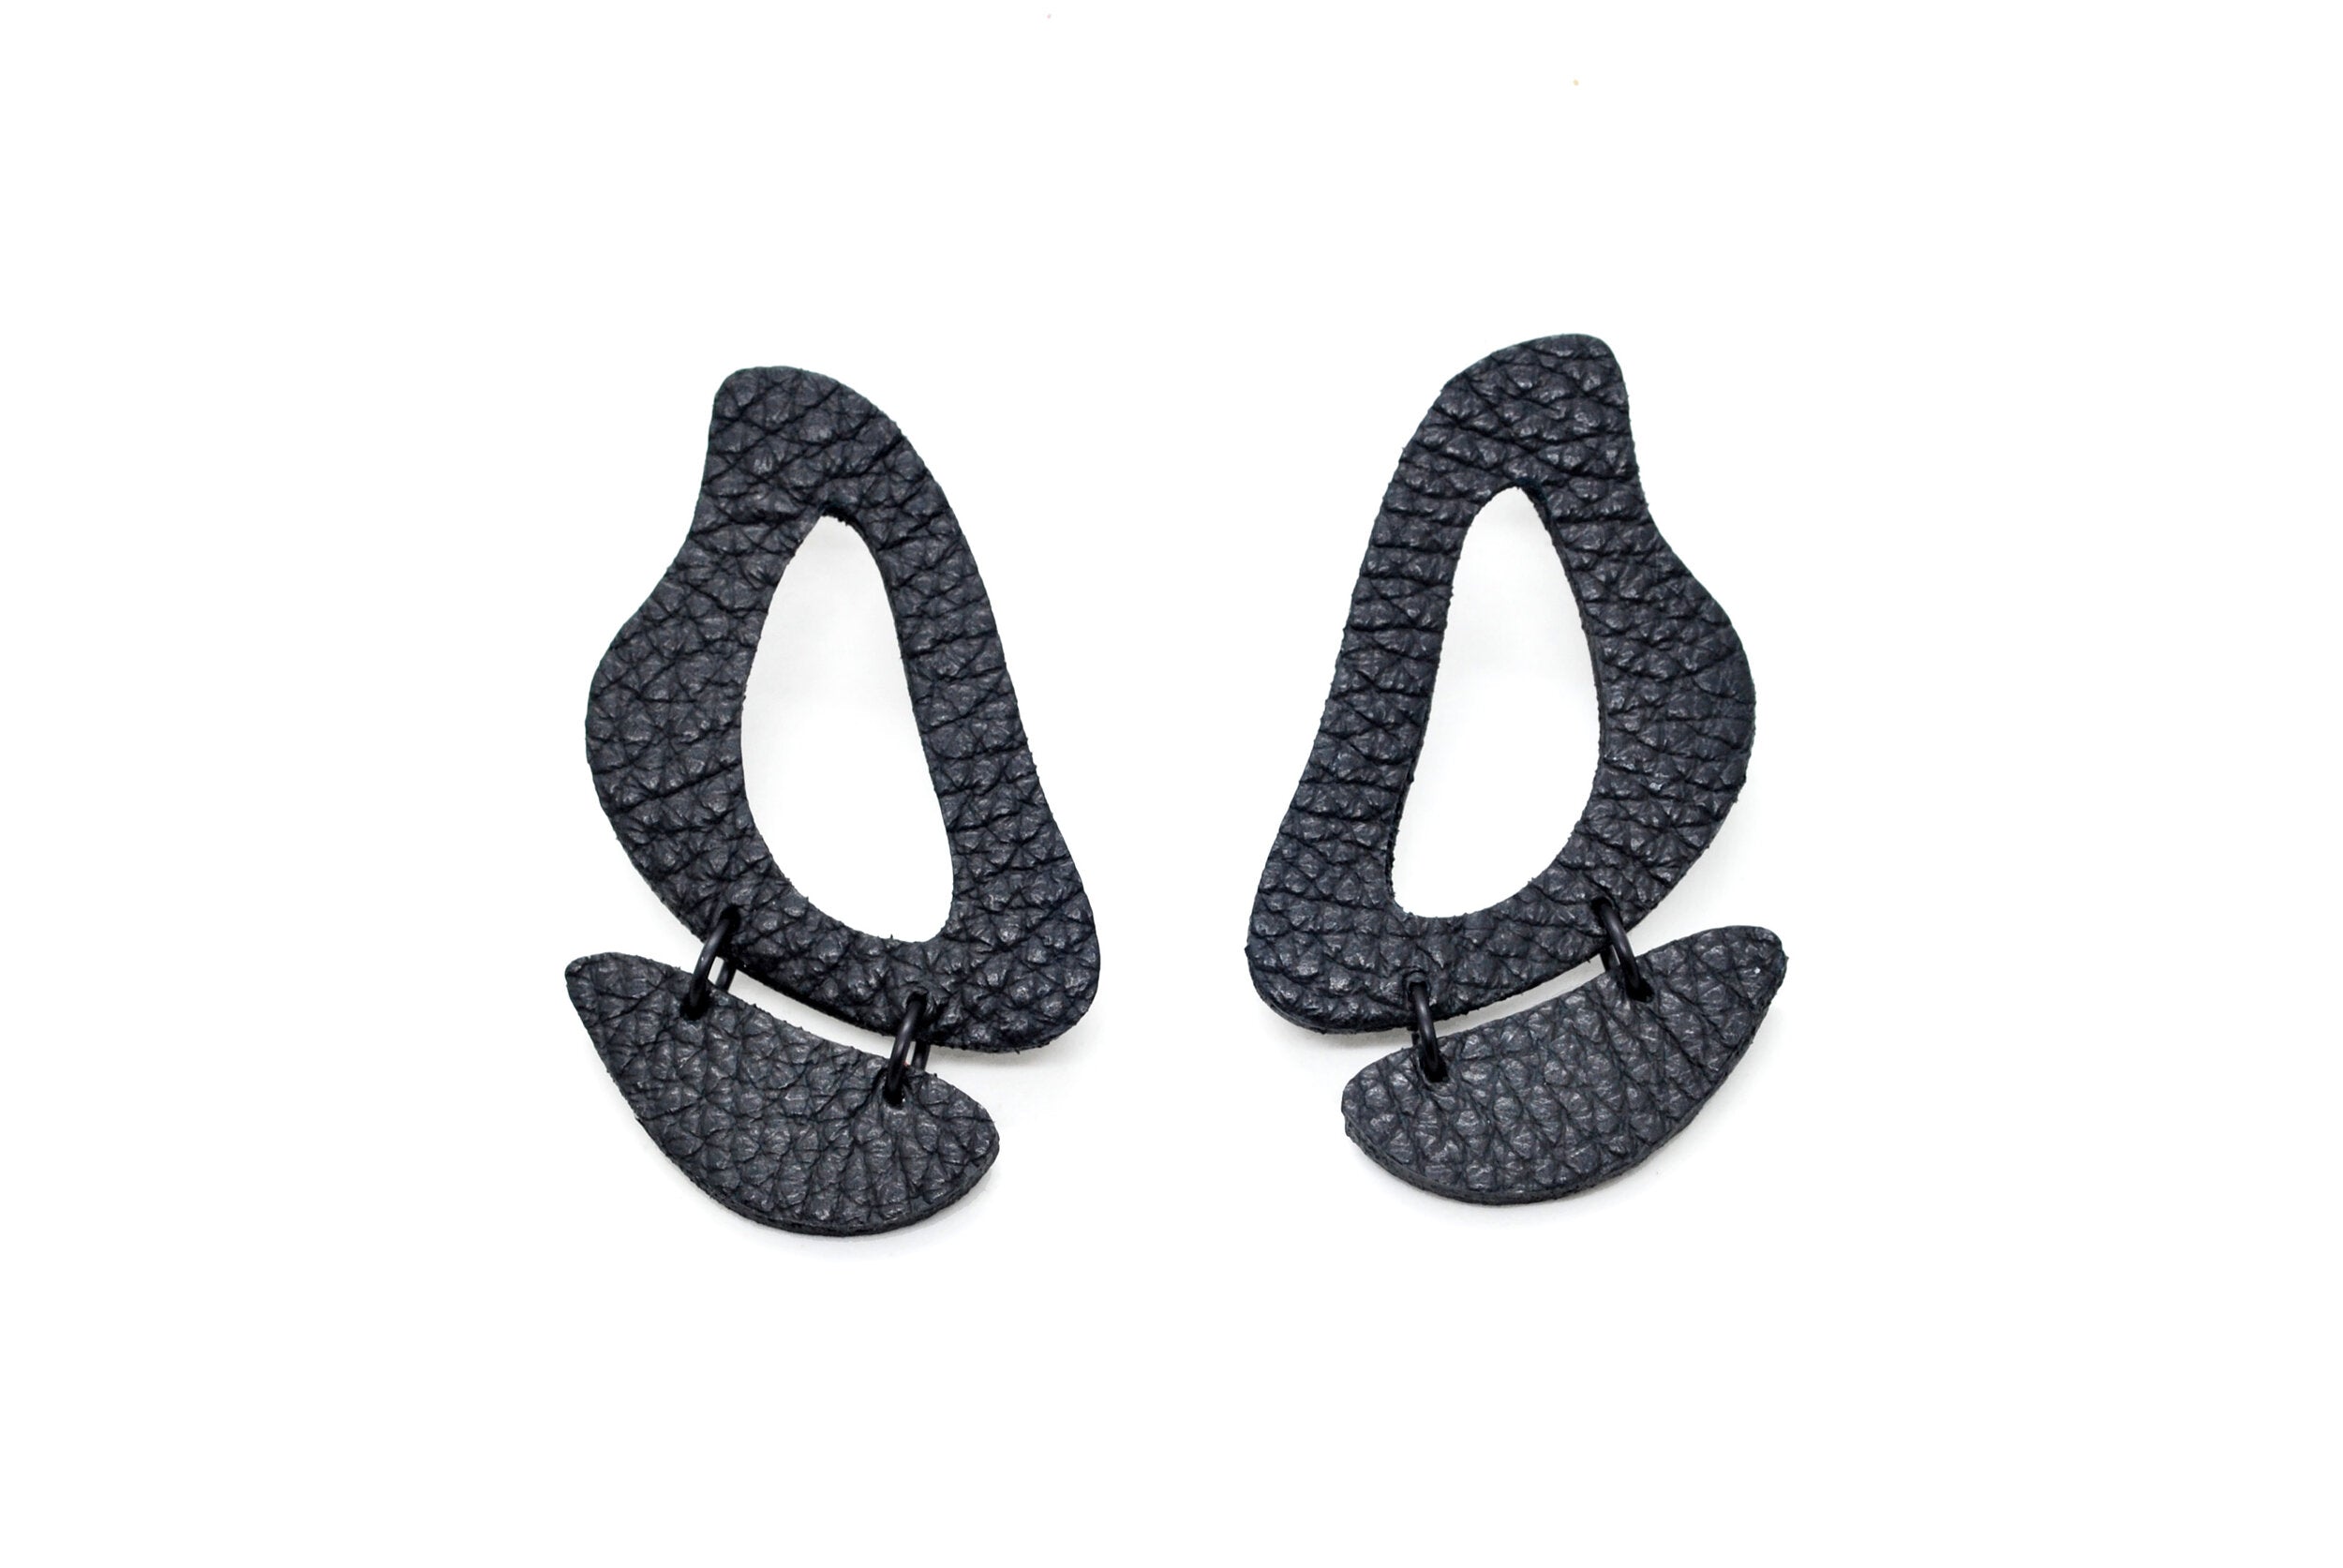 black leather earrings made of cutout organic shapes and anodized aluminum jump rings.